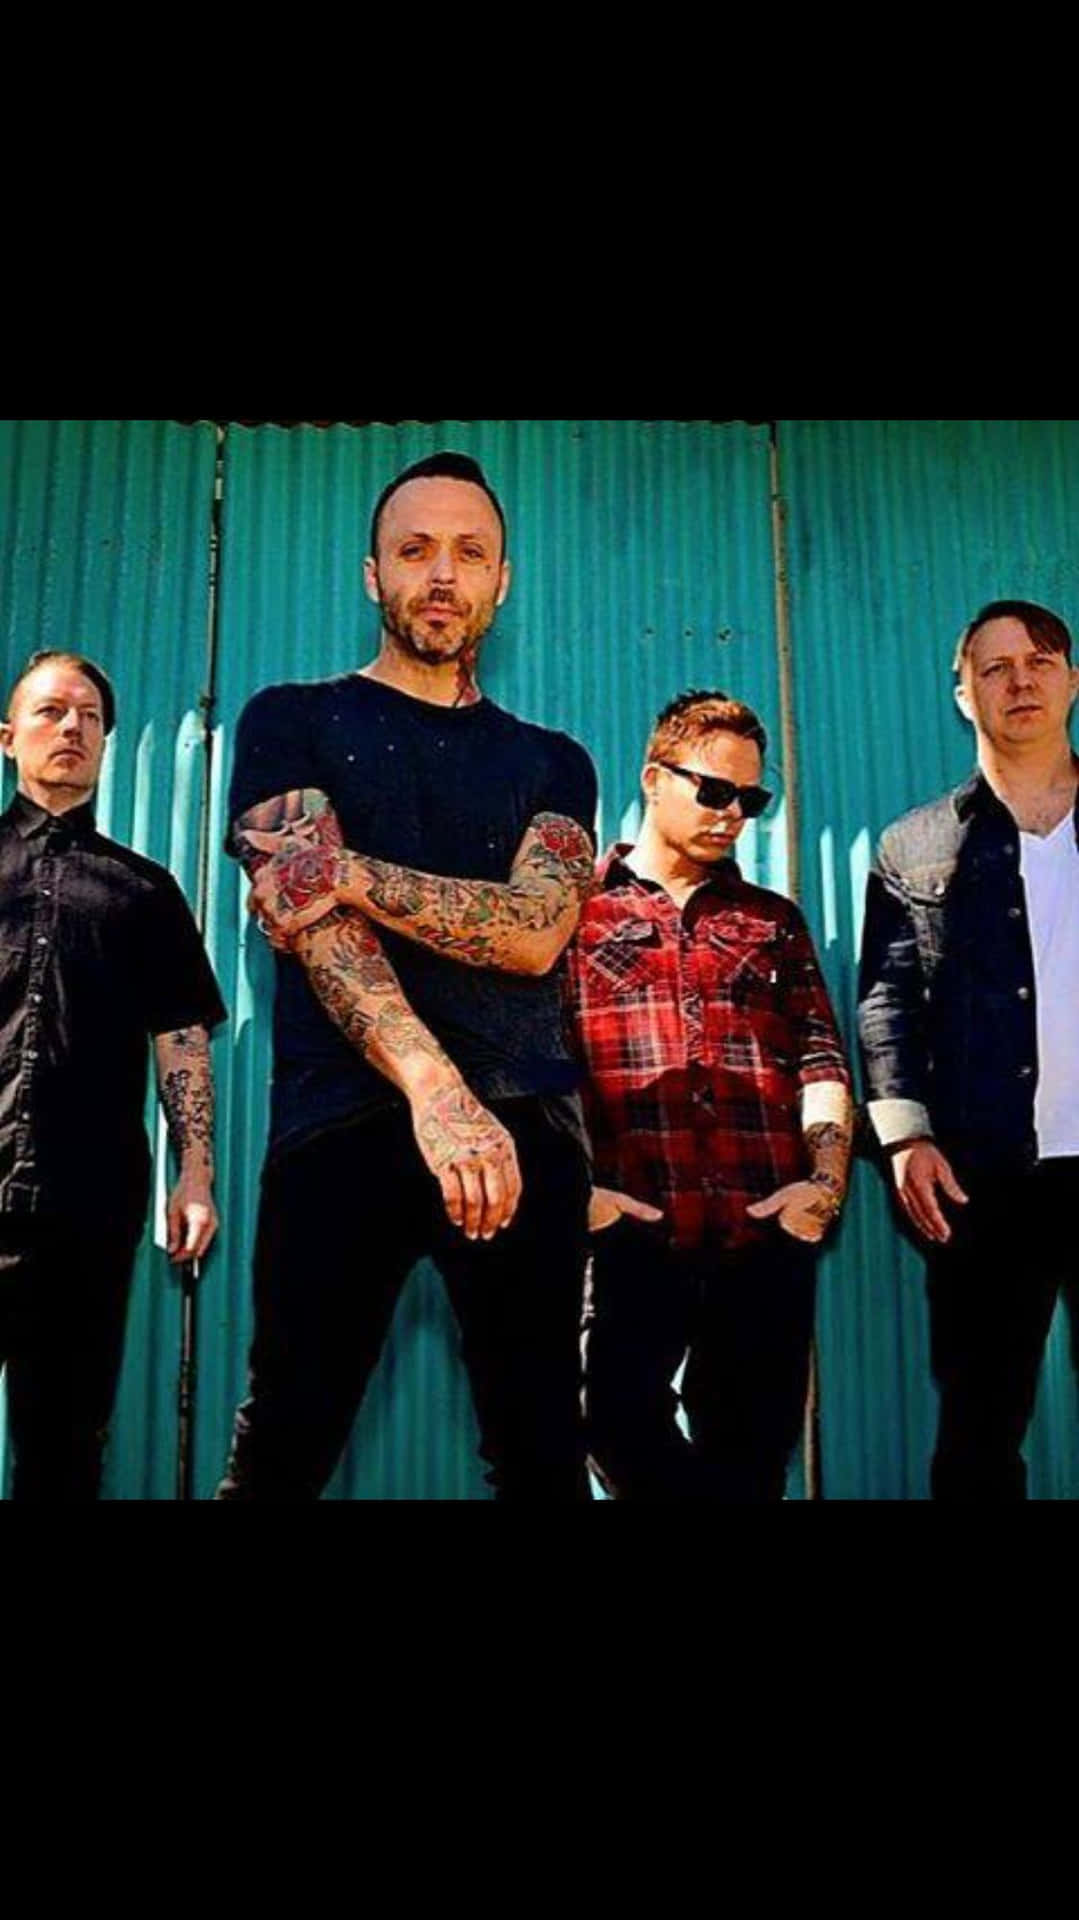 Blue October band performing live in concert Wallpaper